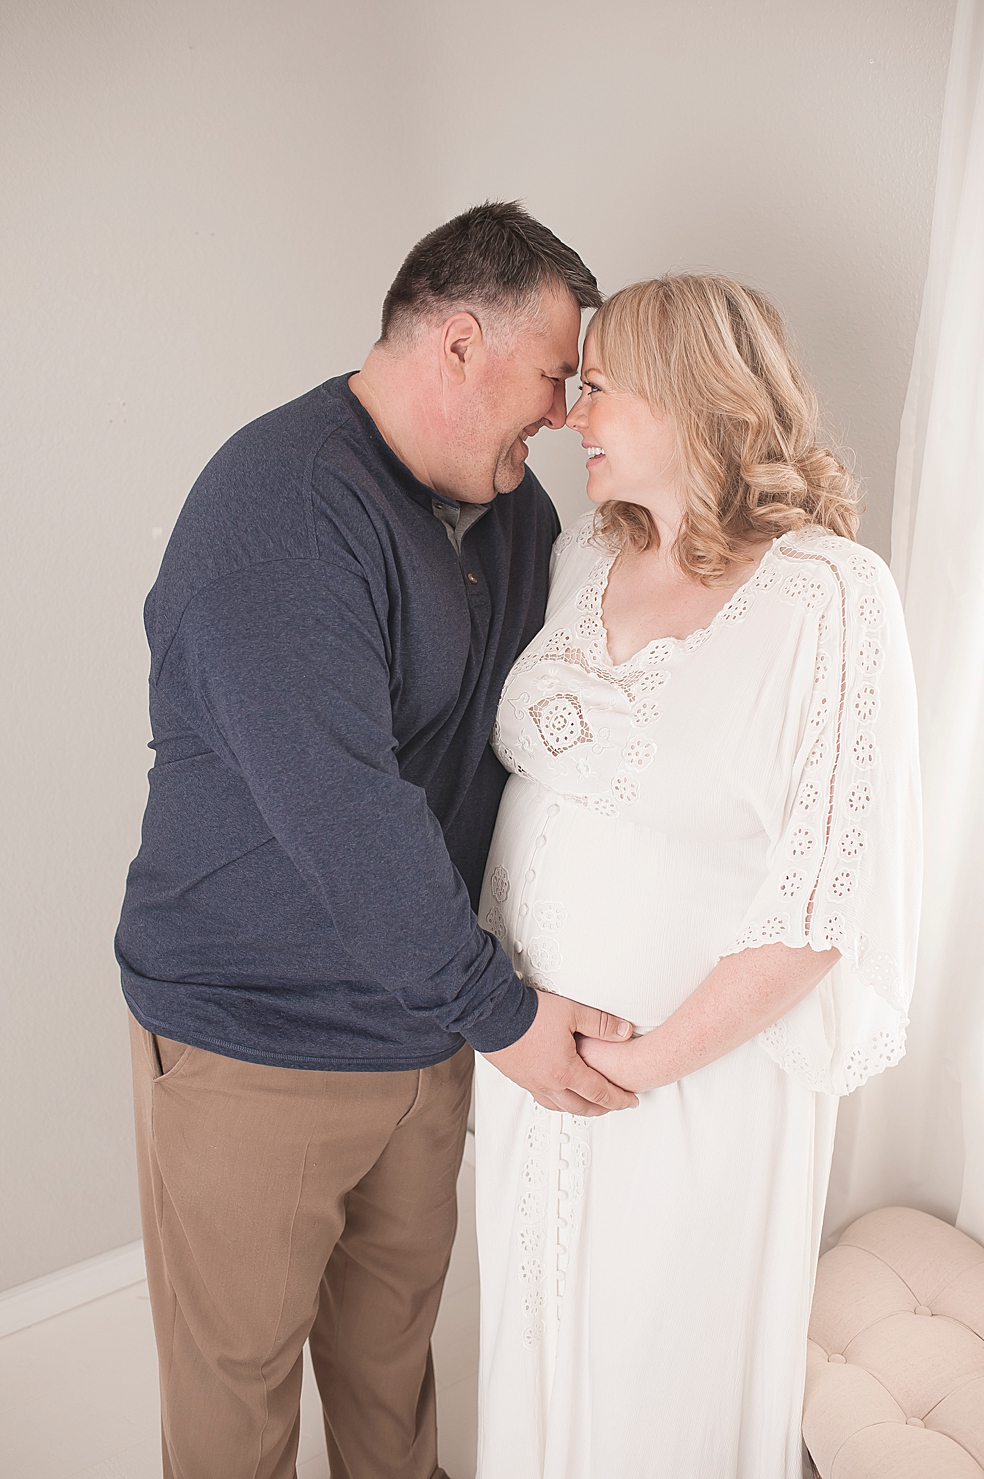 Mom and dad to be snuggling | Photo by Jessica Lee Photography